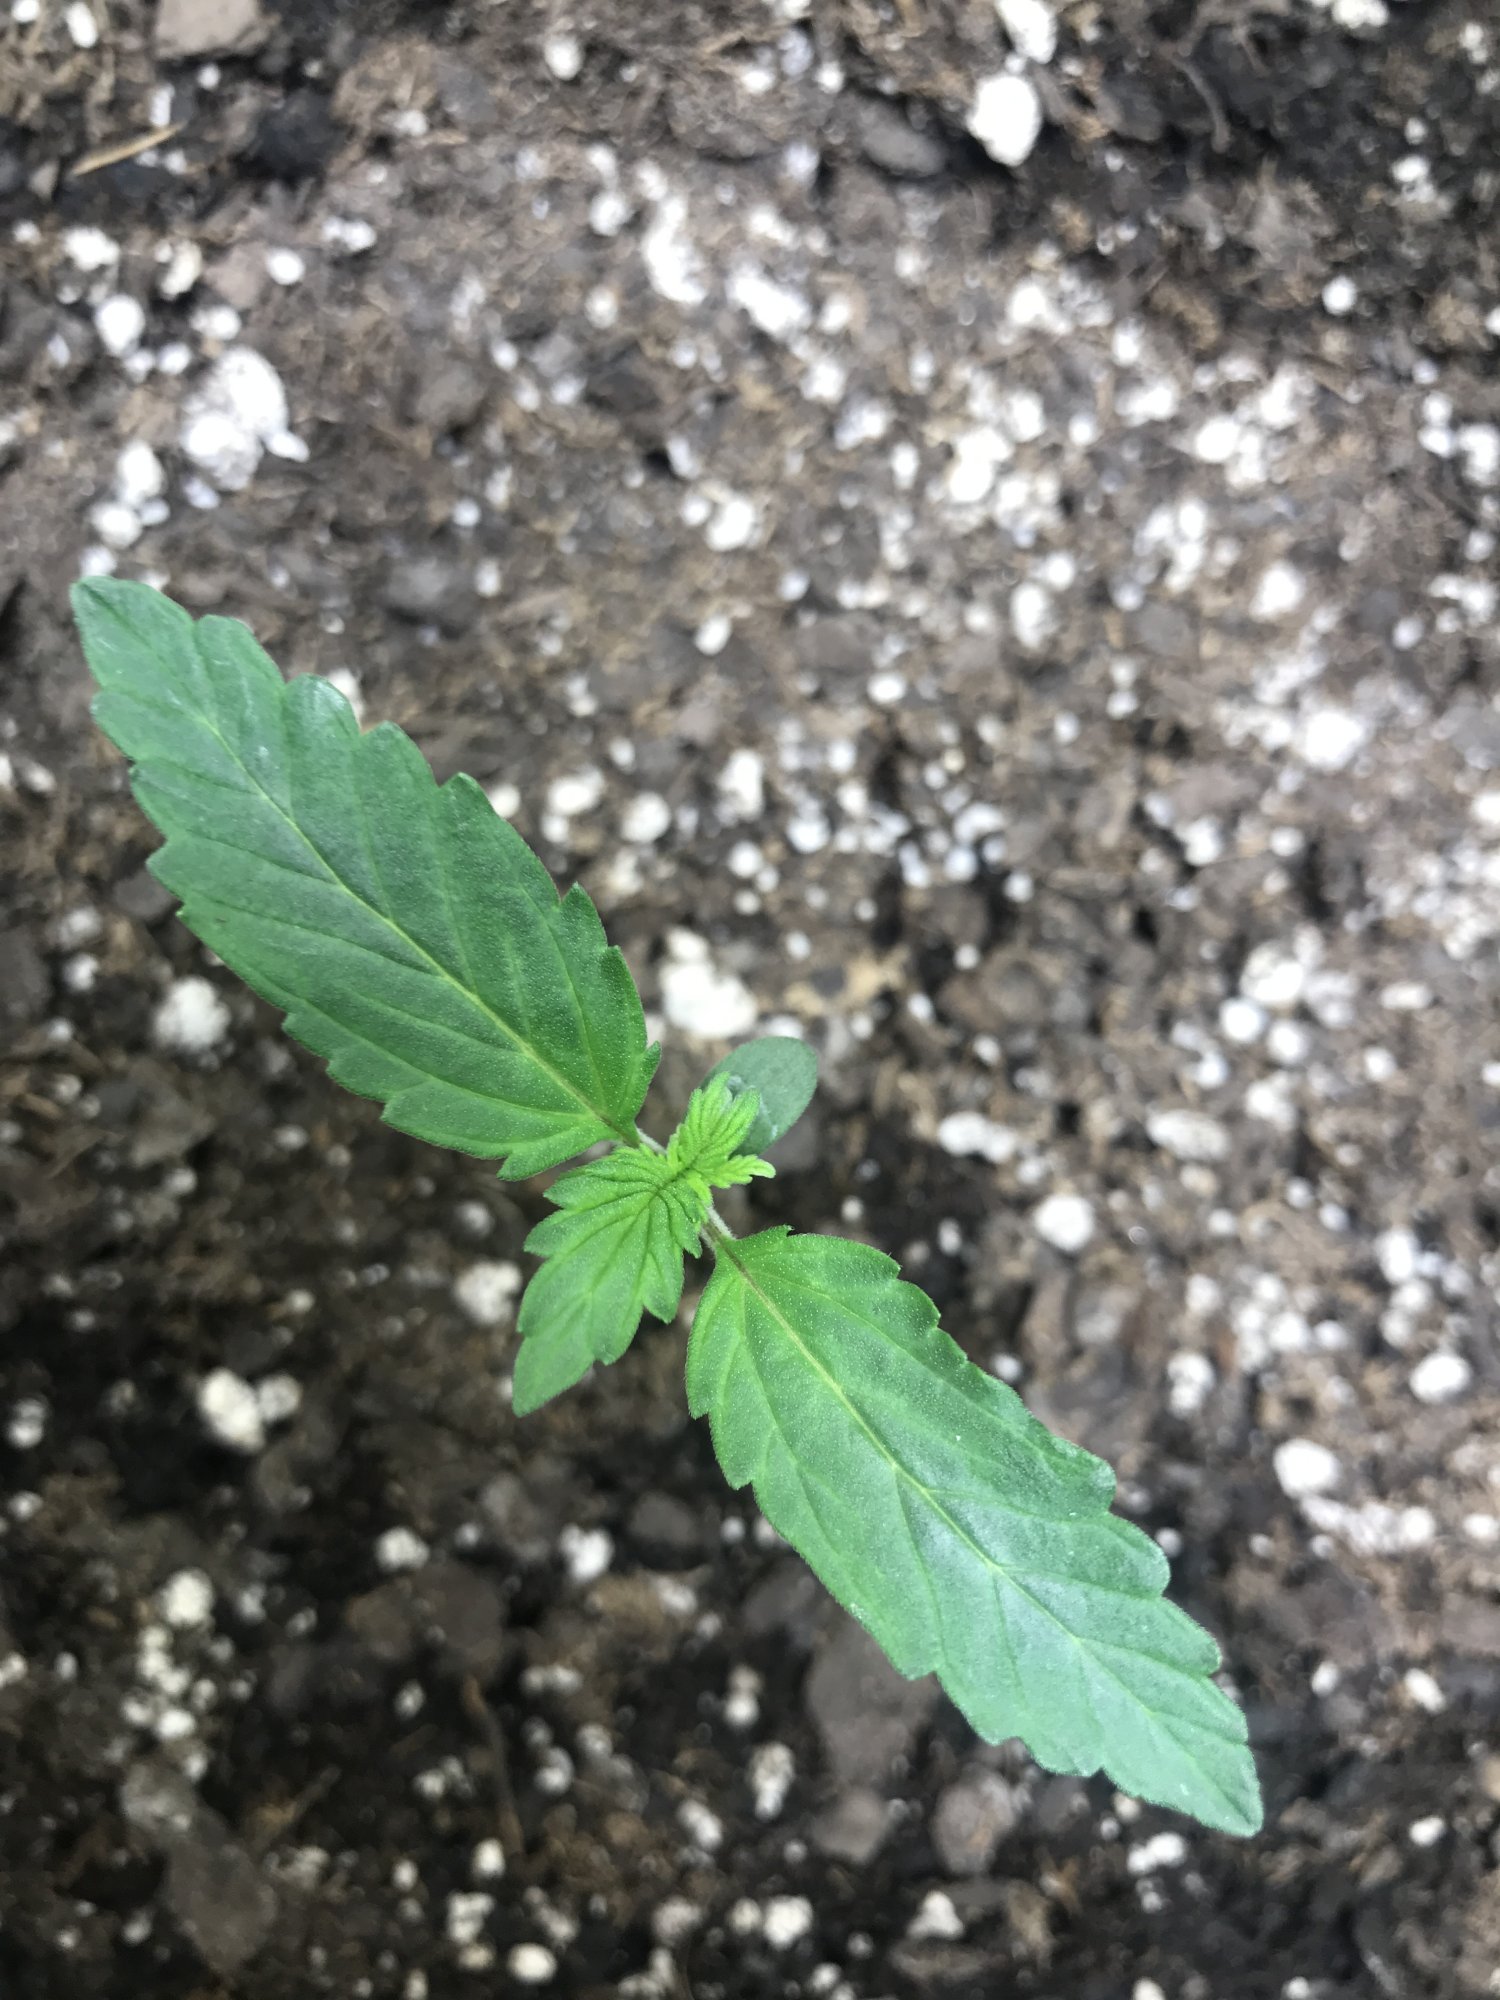 Seedling issue and my last seed of this strain